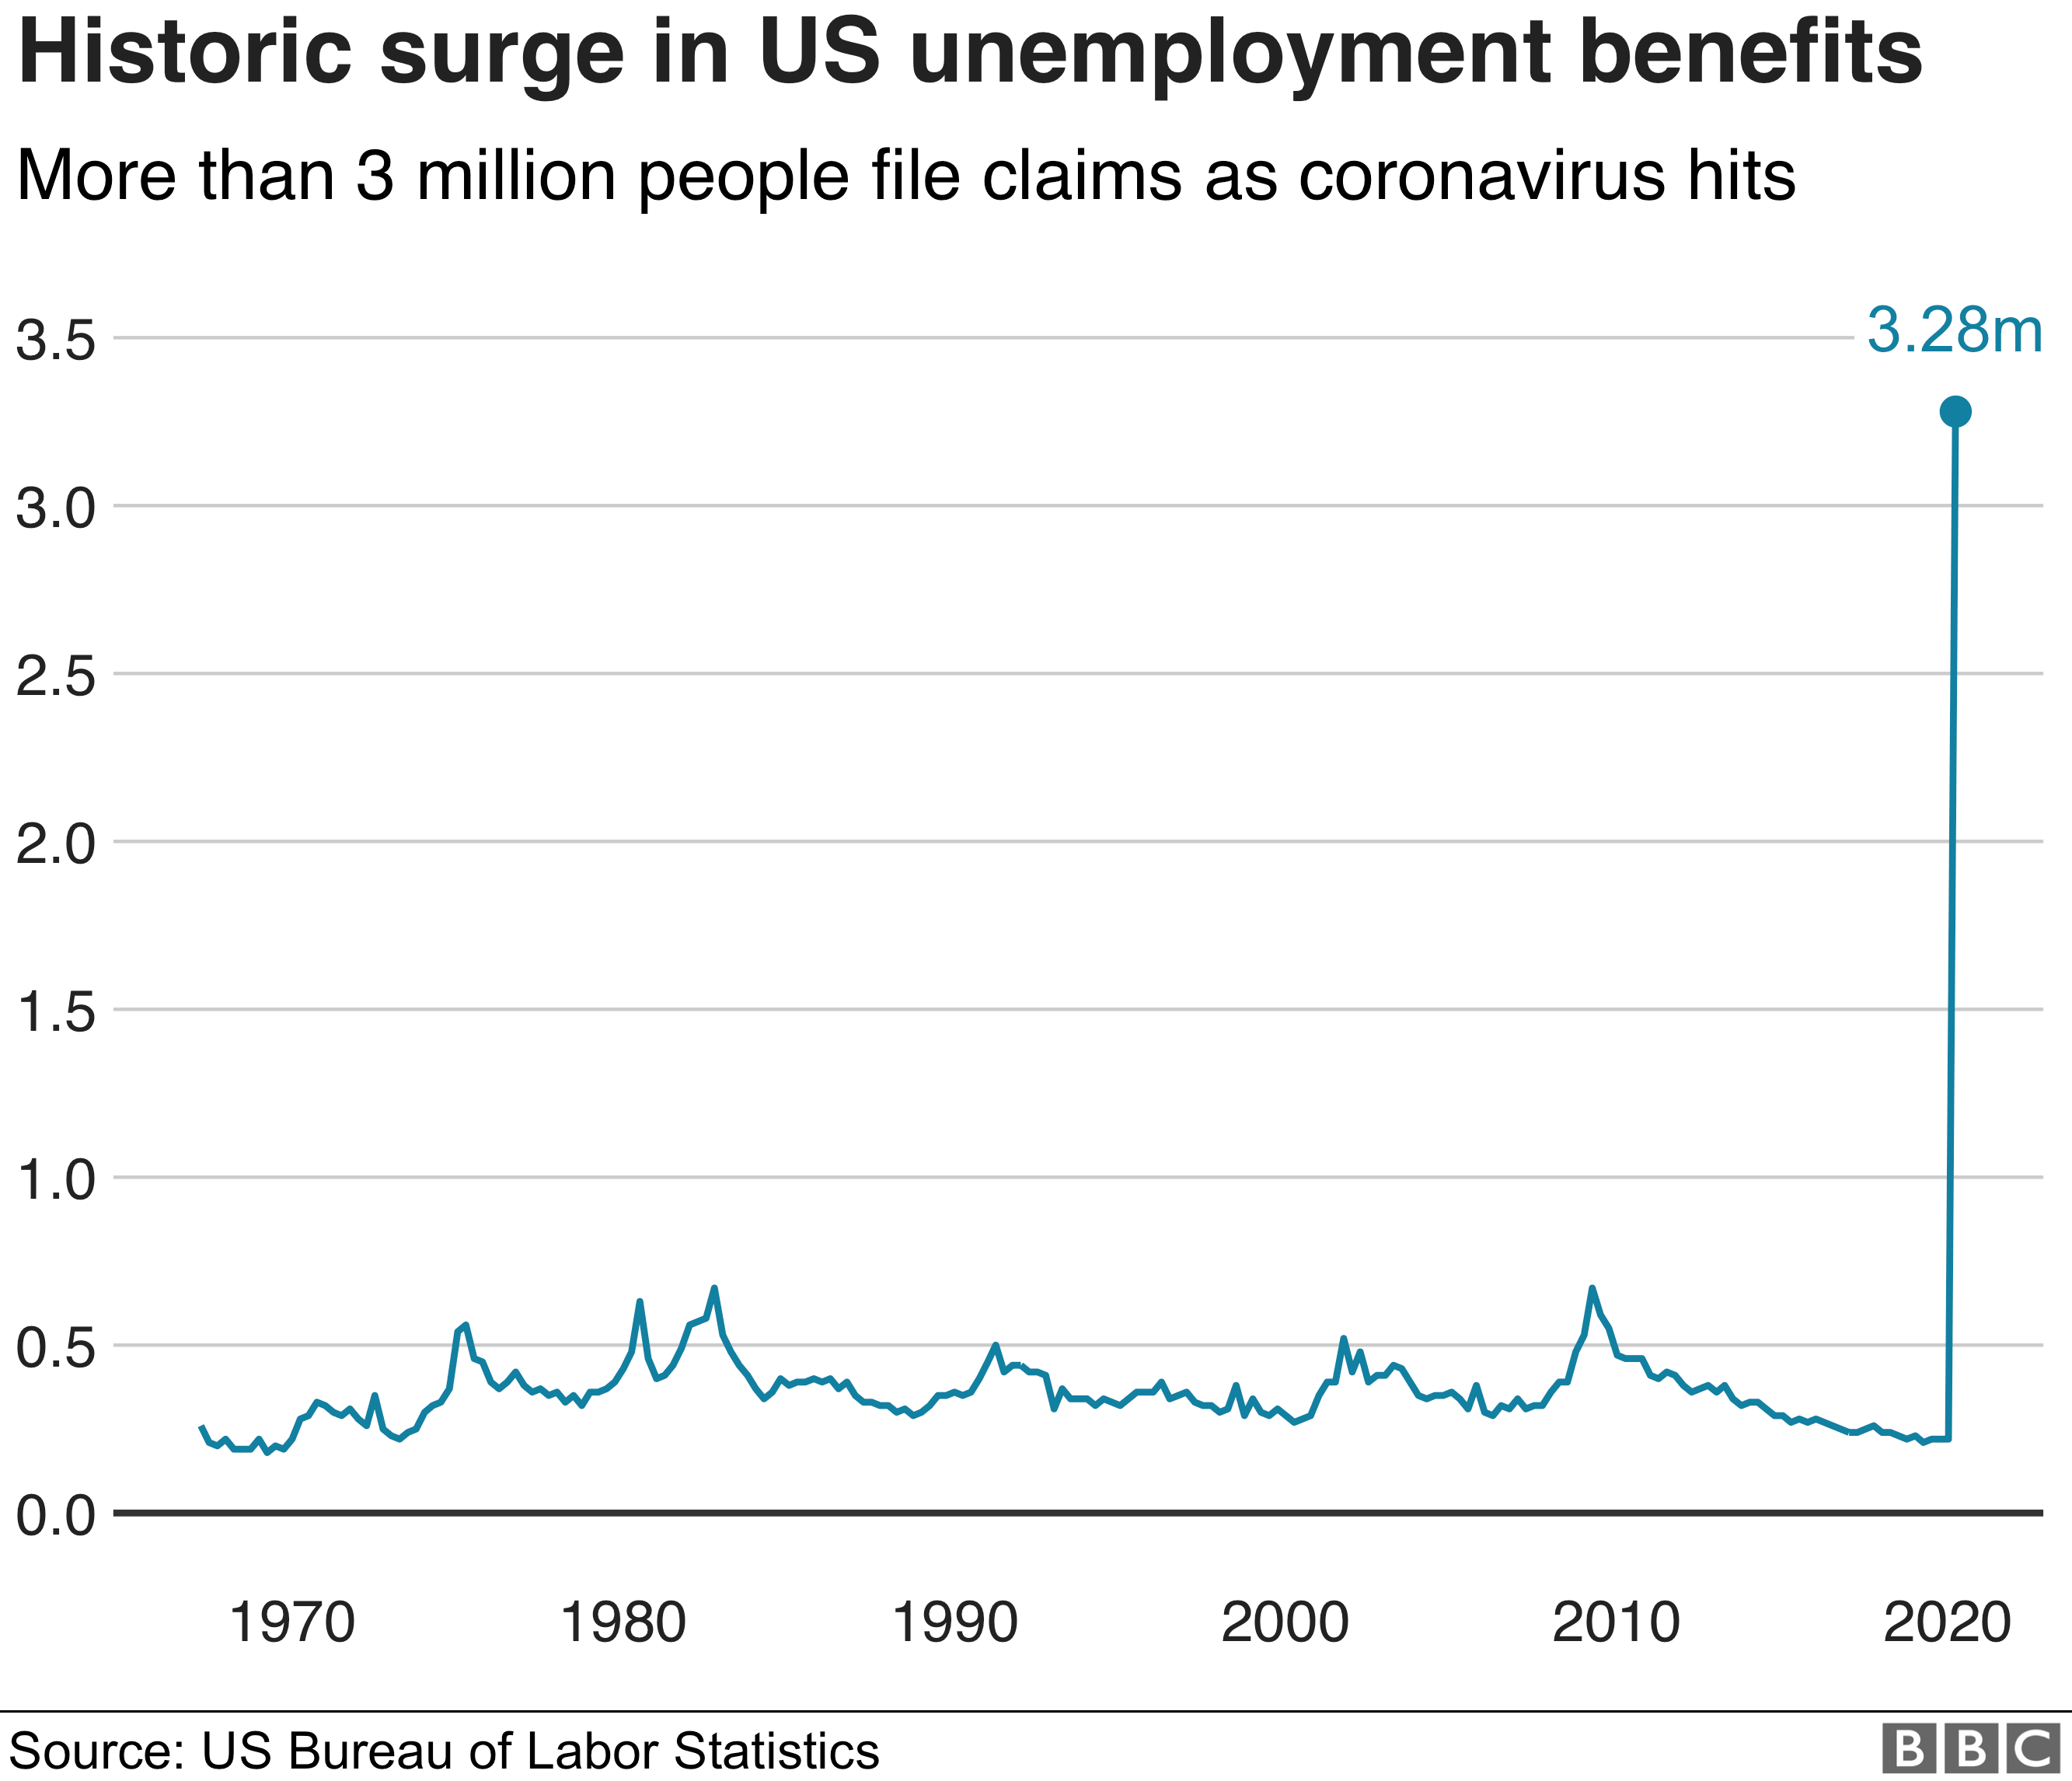 A graphic demonstrating a historic surge in US unemployment benefits